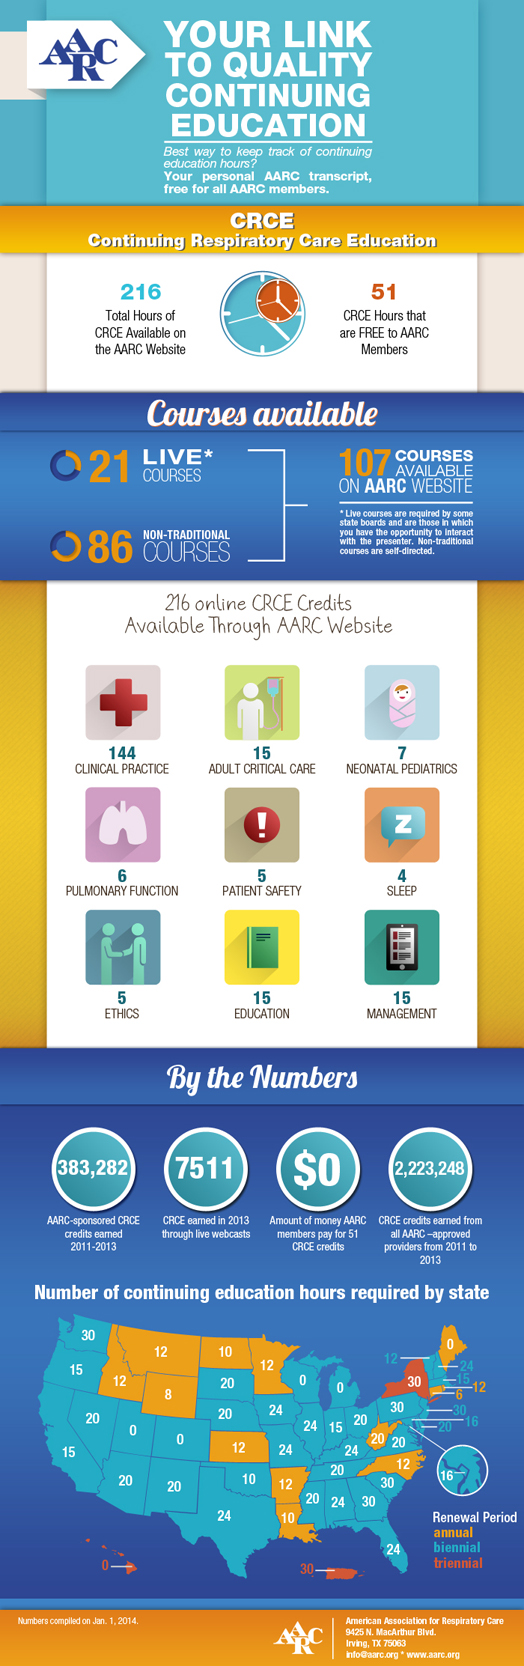 CRCE Infographic